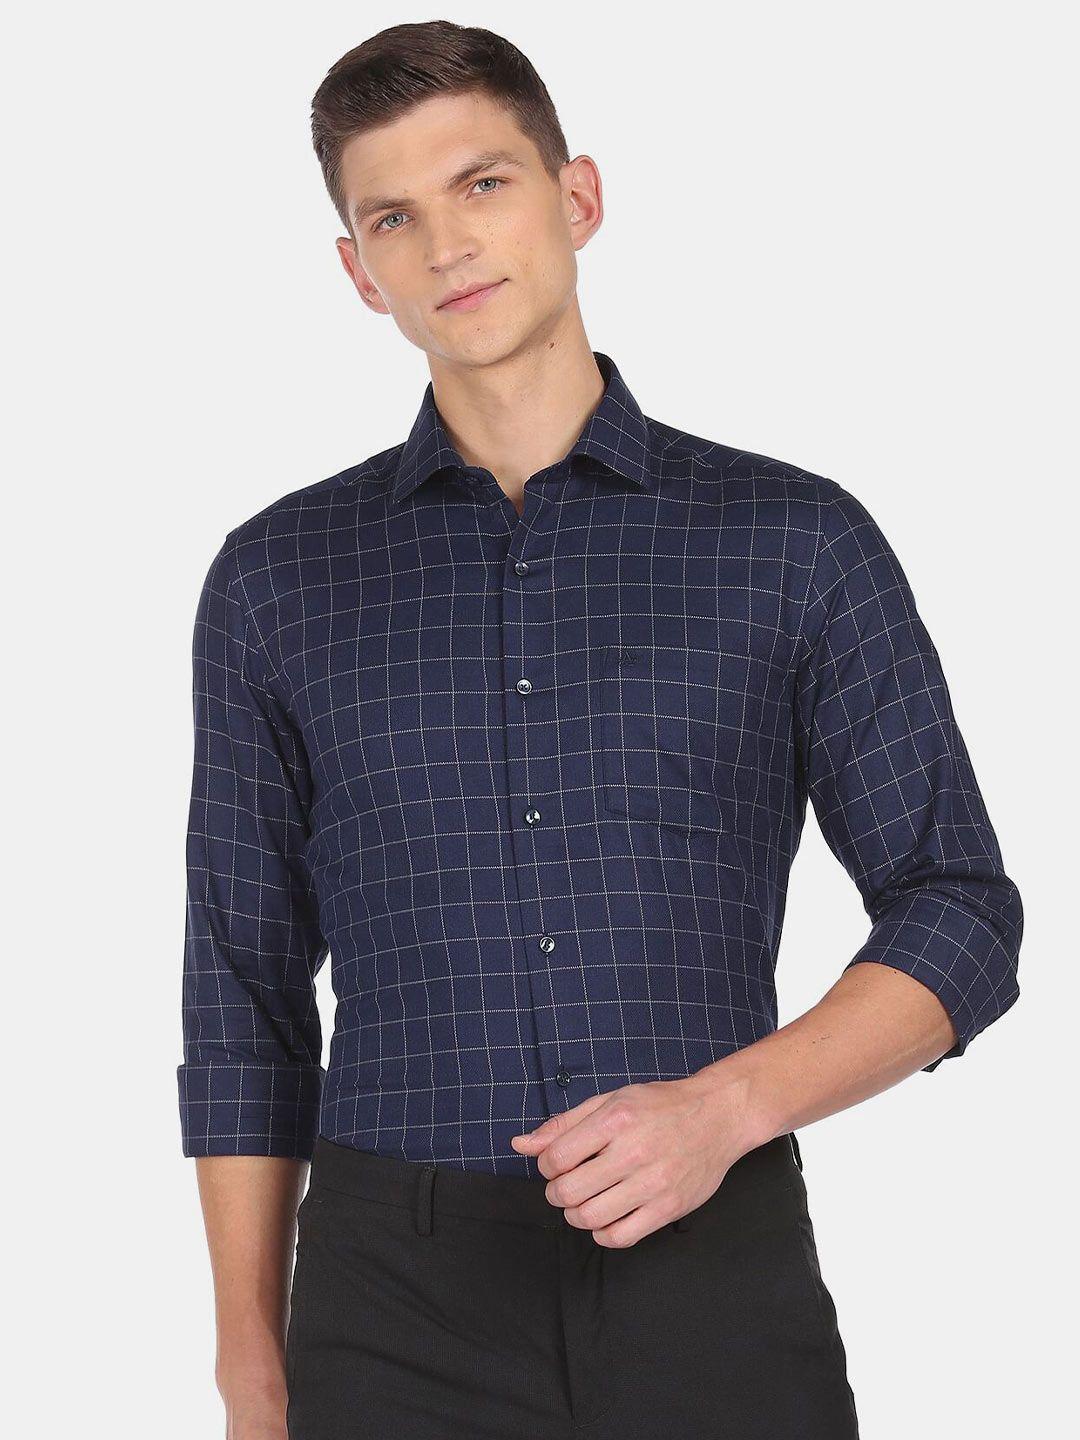 arrow-men-blue-slim-fit-grid-tattersall-checked-cotton-casual-shirt